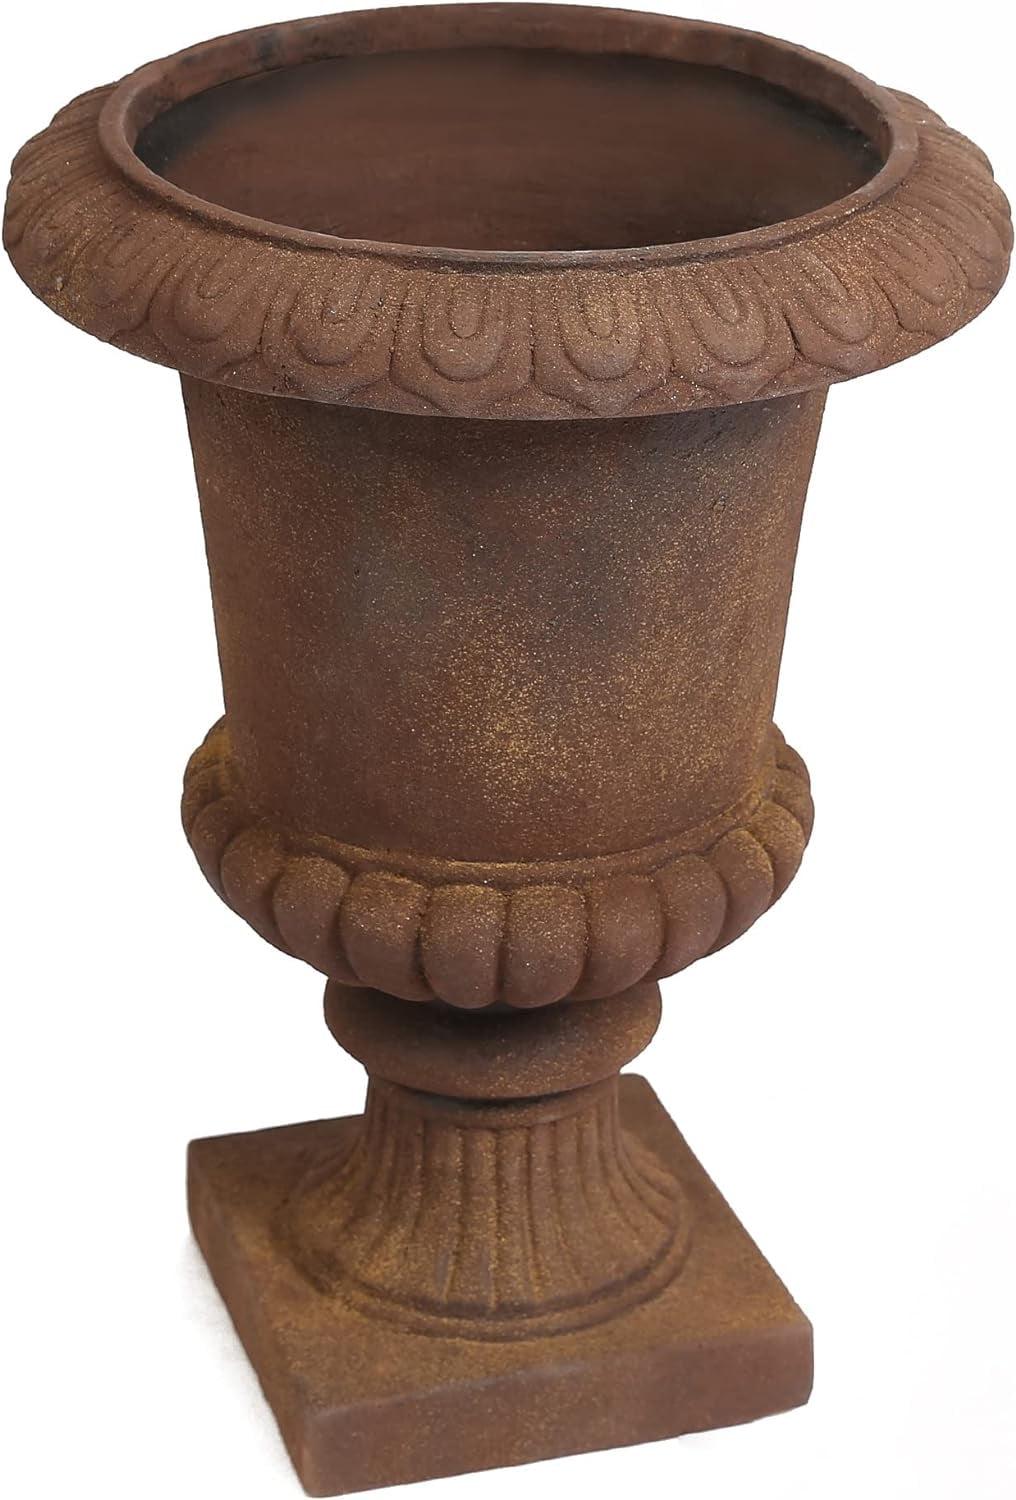 Rustic Brown 25" MgO Urn Planter for Indoor/Outdoor Decor